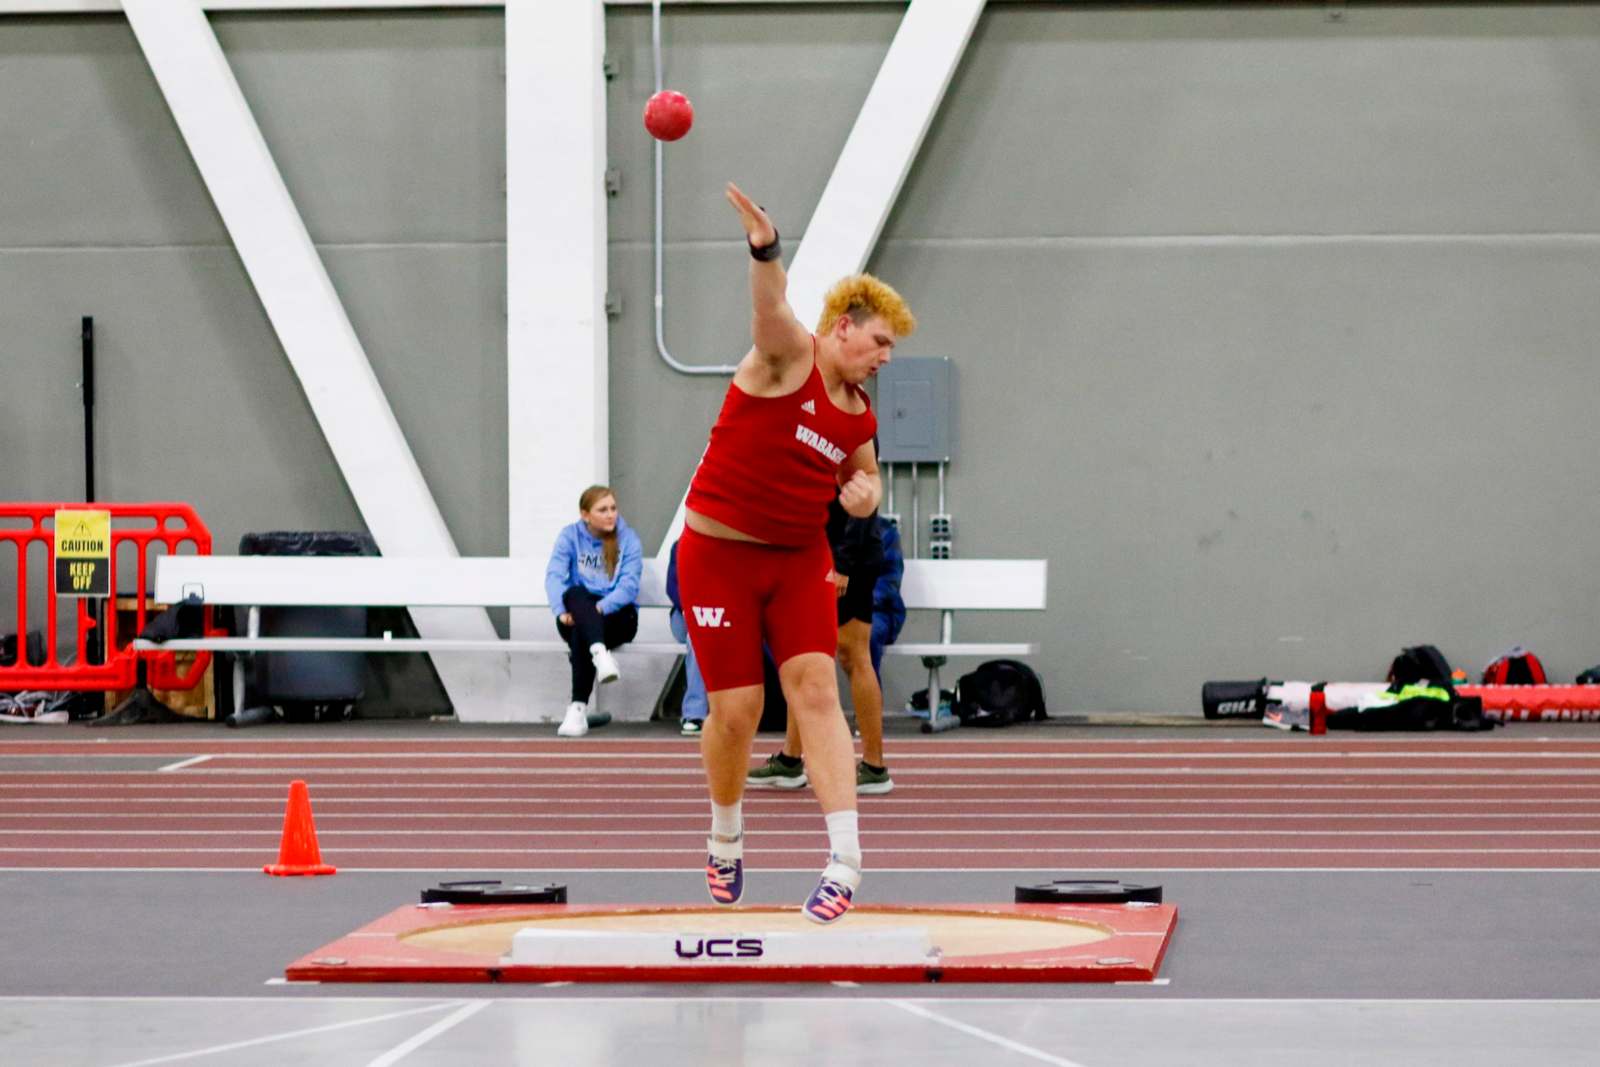 a man throwing a ball in a track